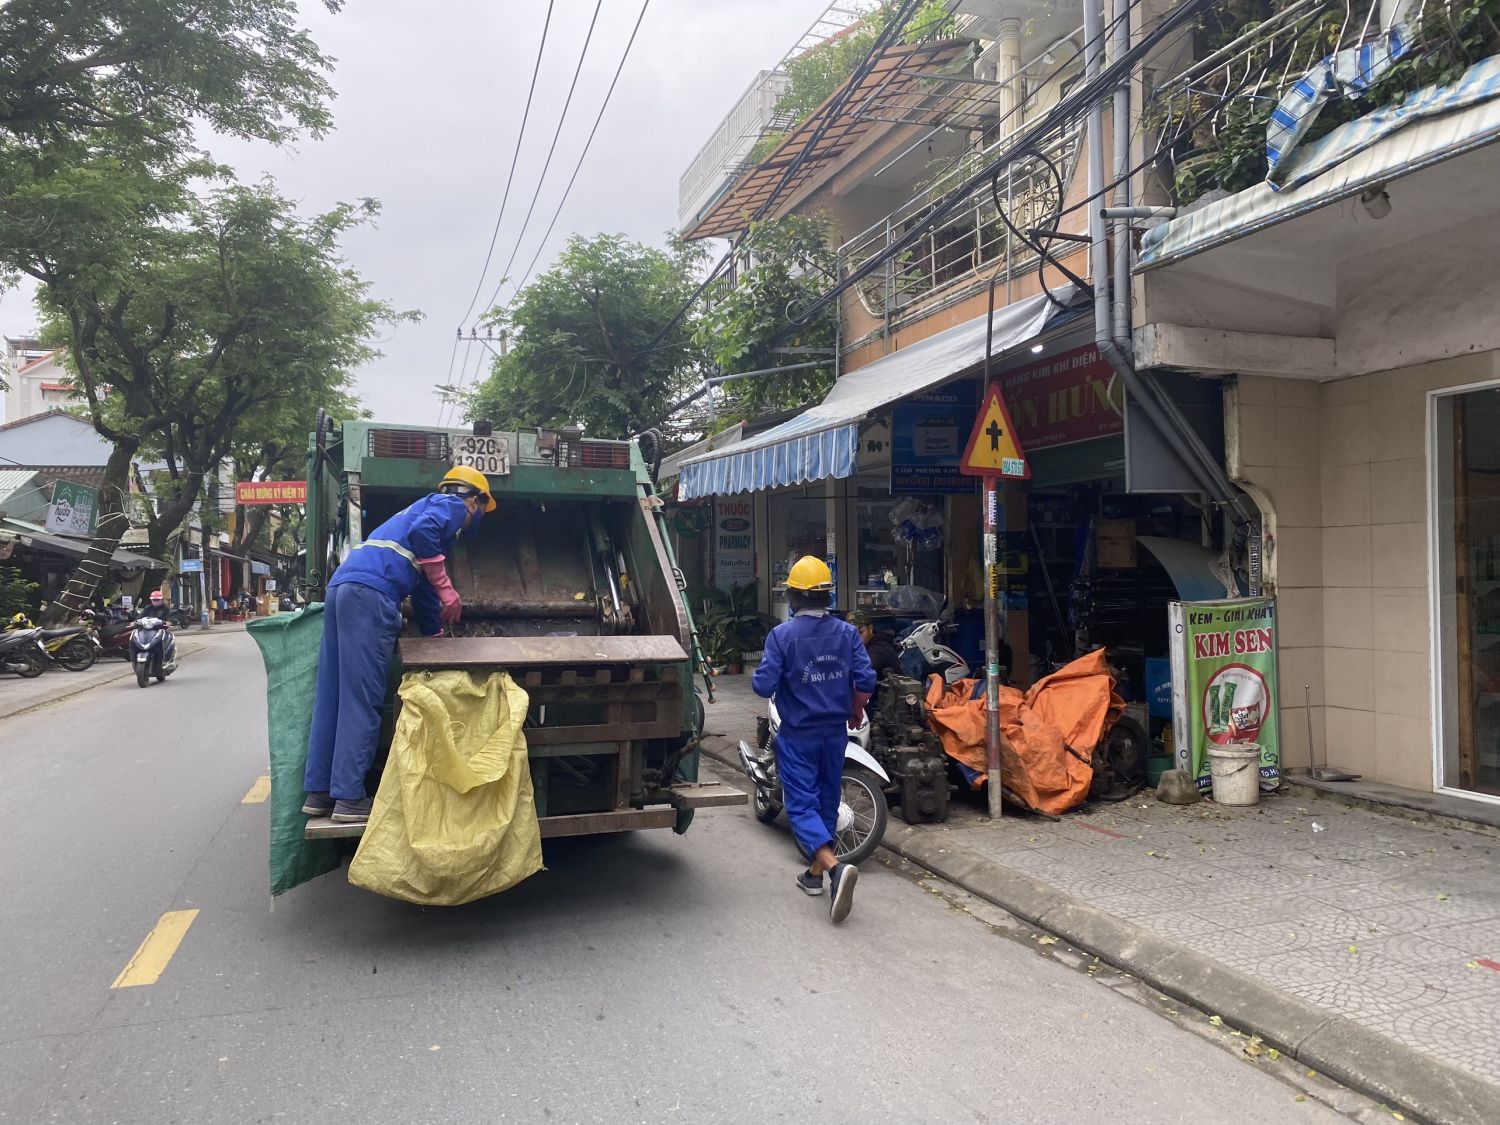 Employees of Hoi An Public Works Company were collecting waste in Cam Nam, Hoi An